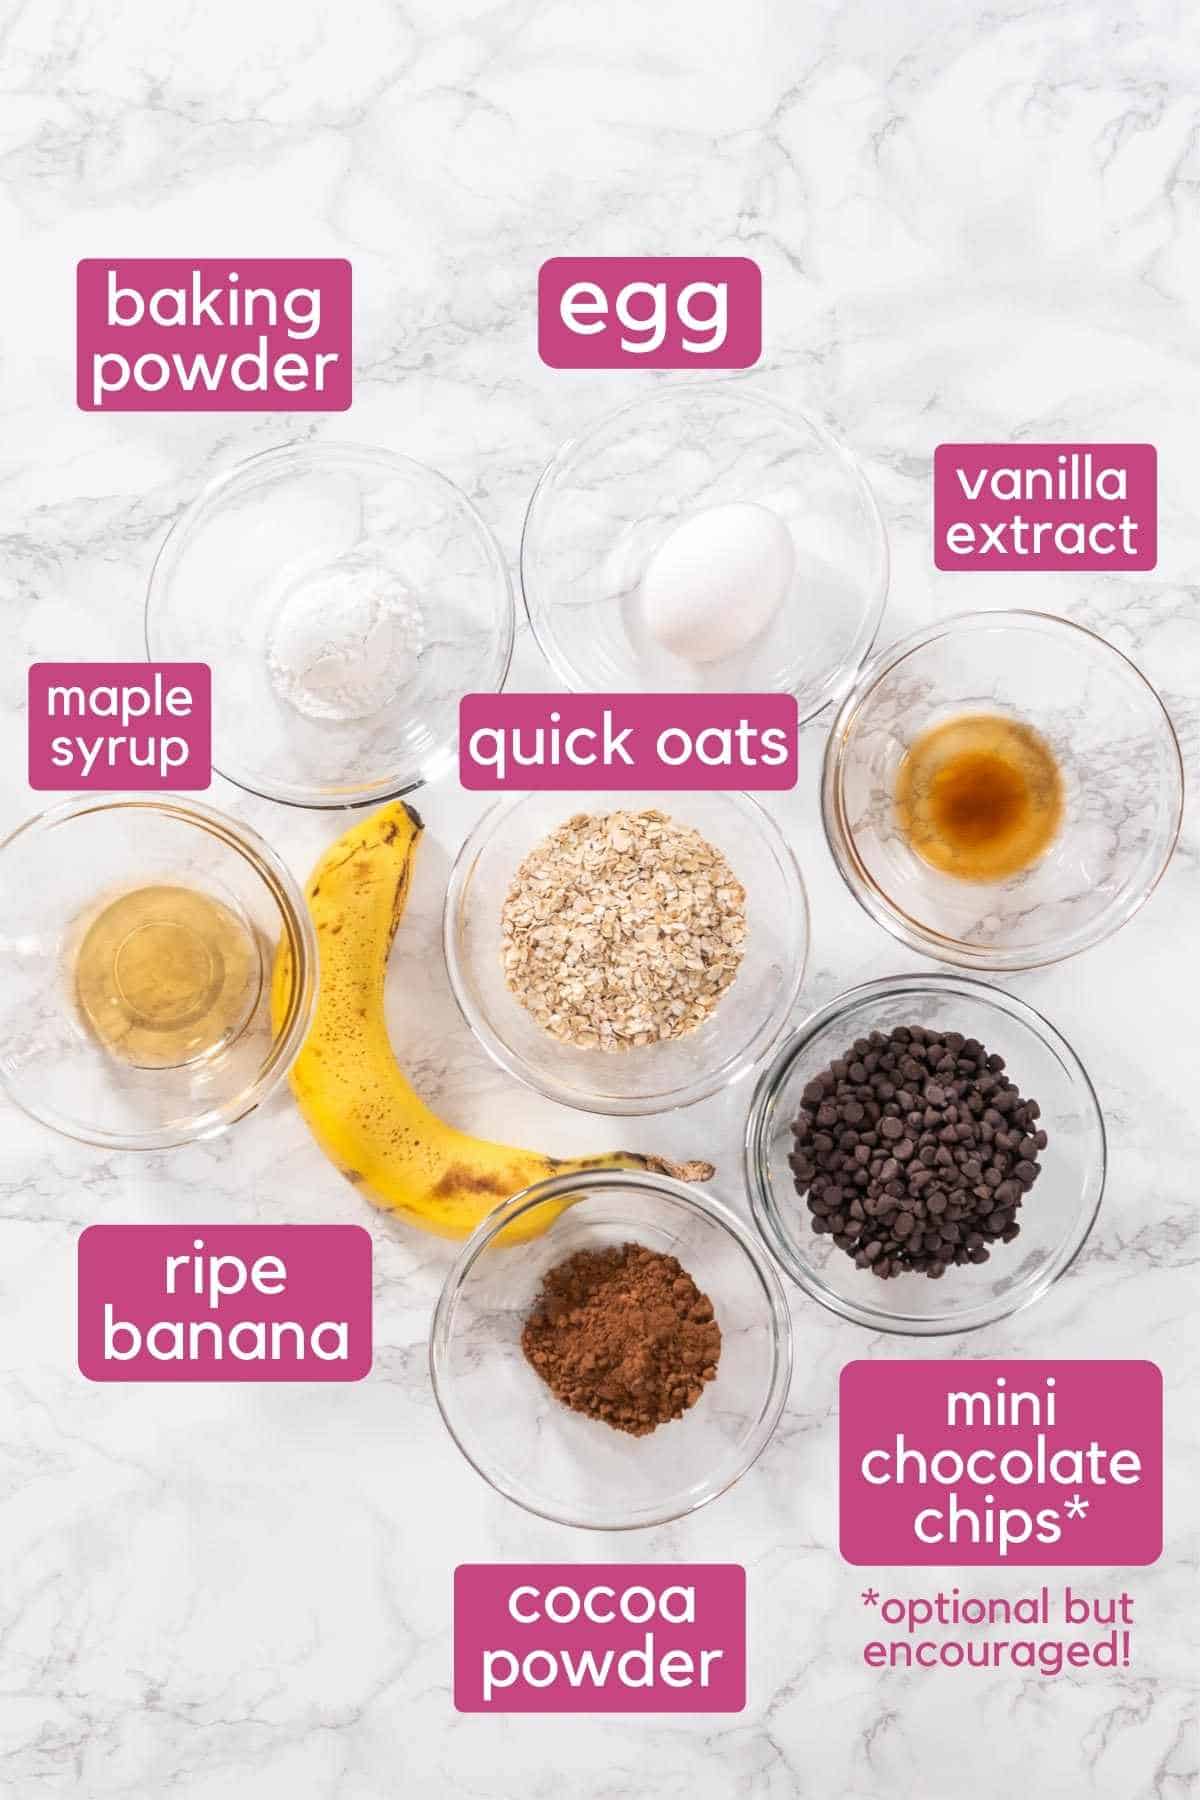 5 Minute Chocolate Baked Oats Ingredients.